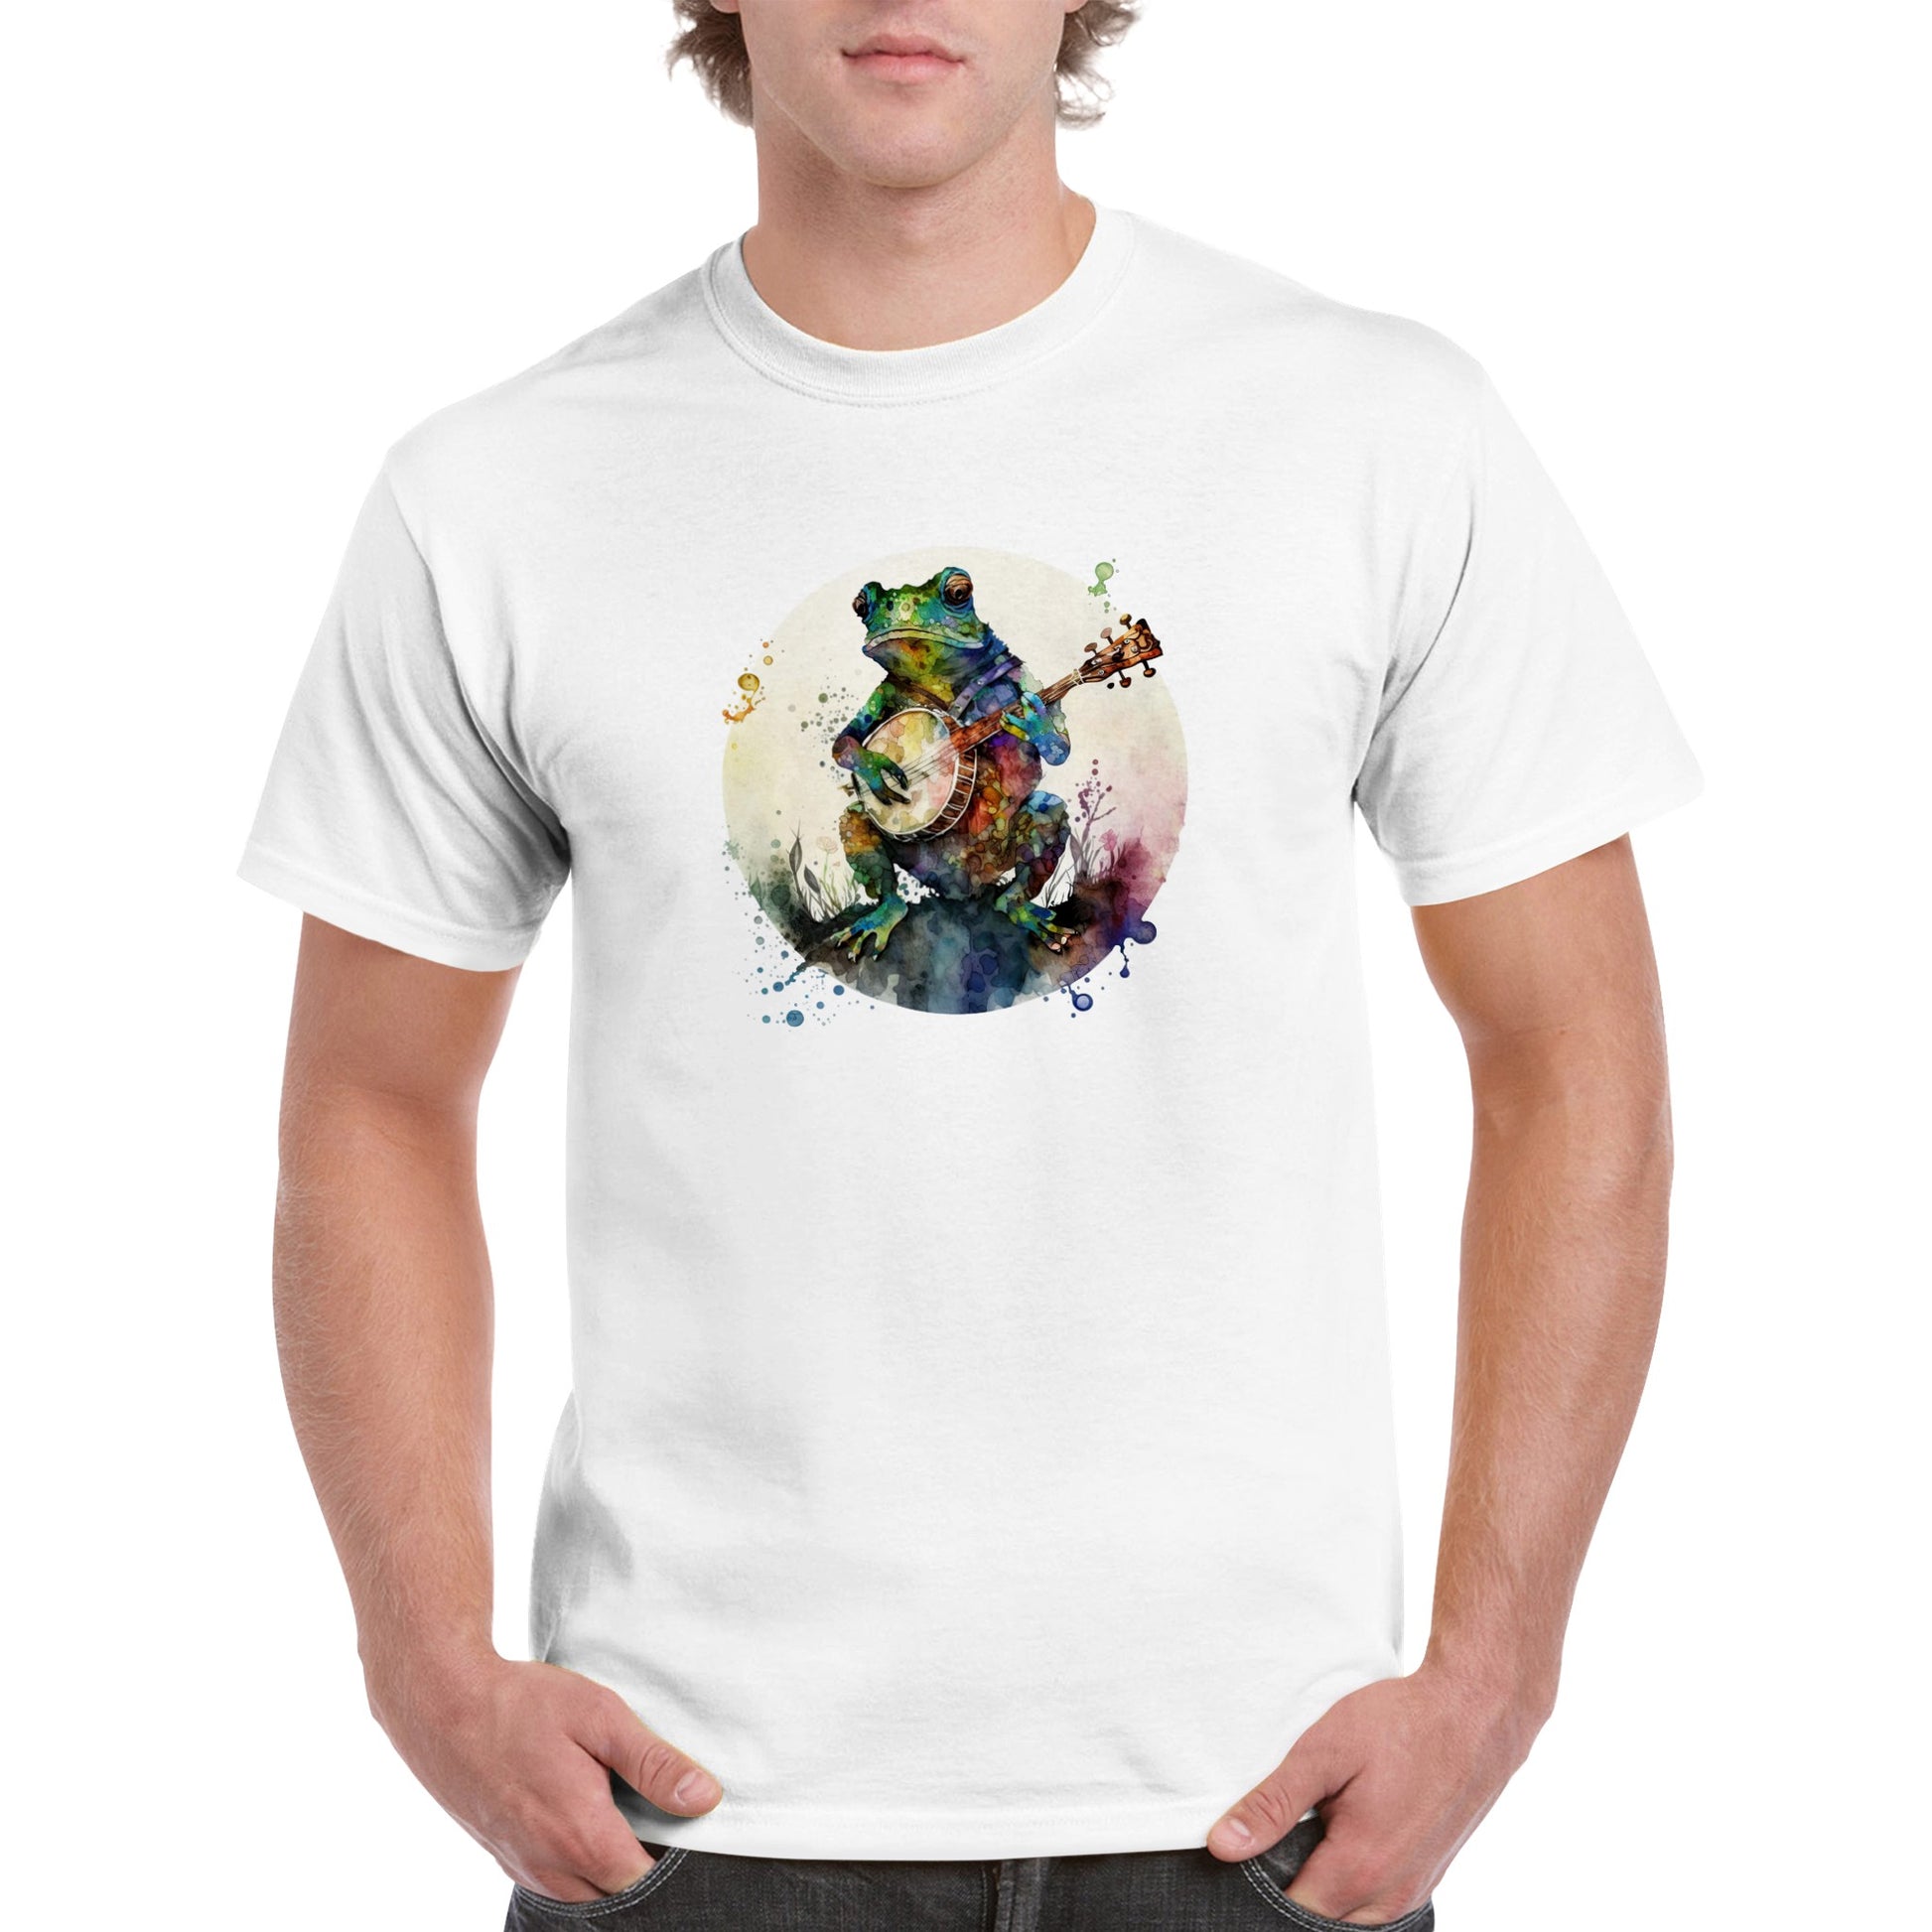 Guy wearing a white t-shirt with a frog playing a banjo print